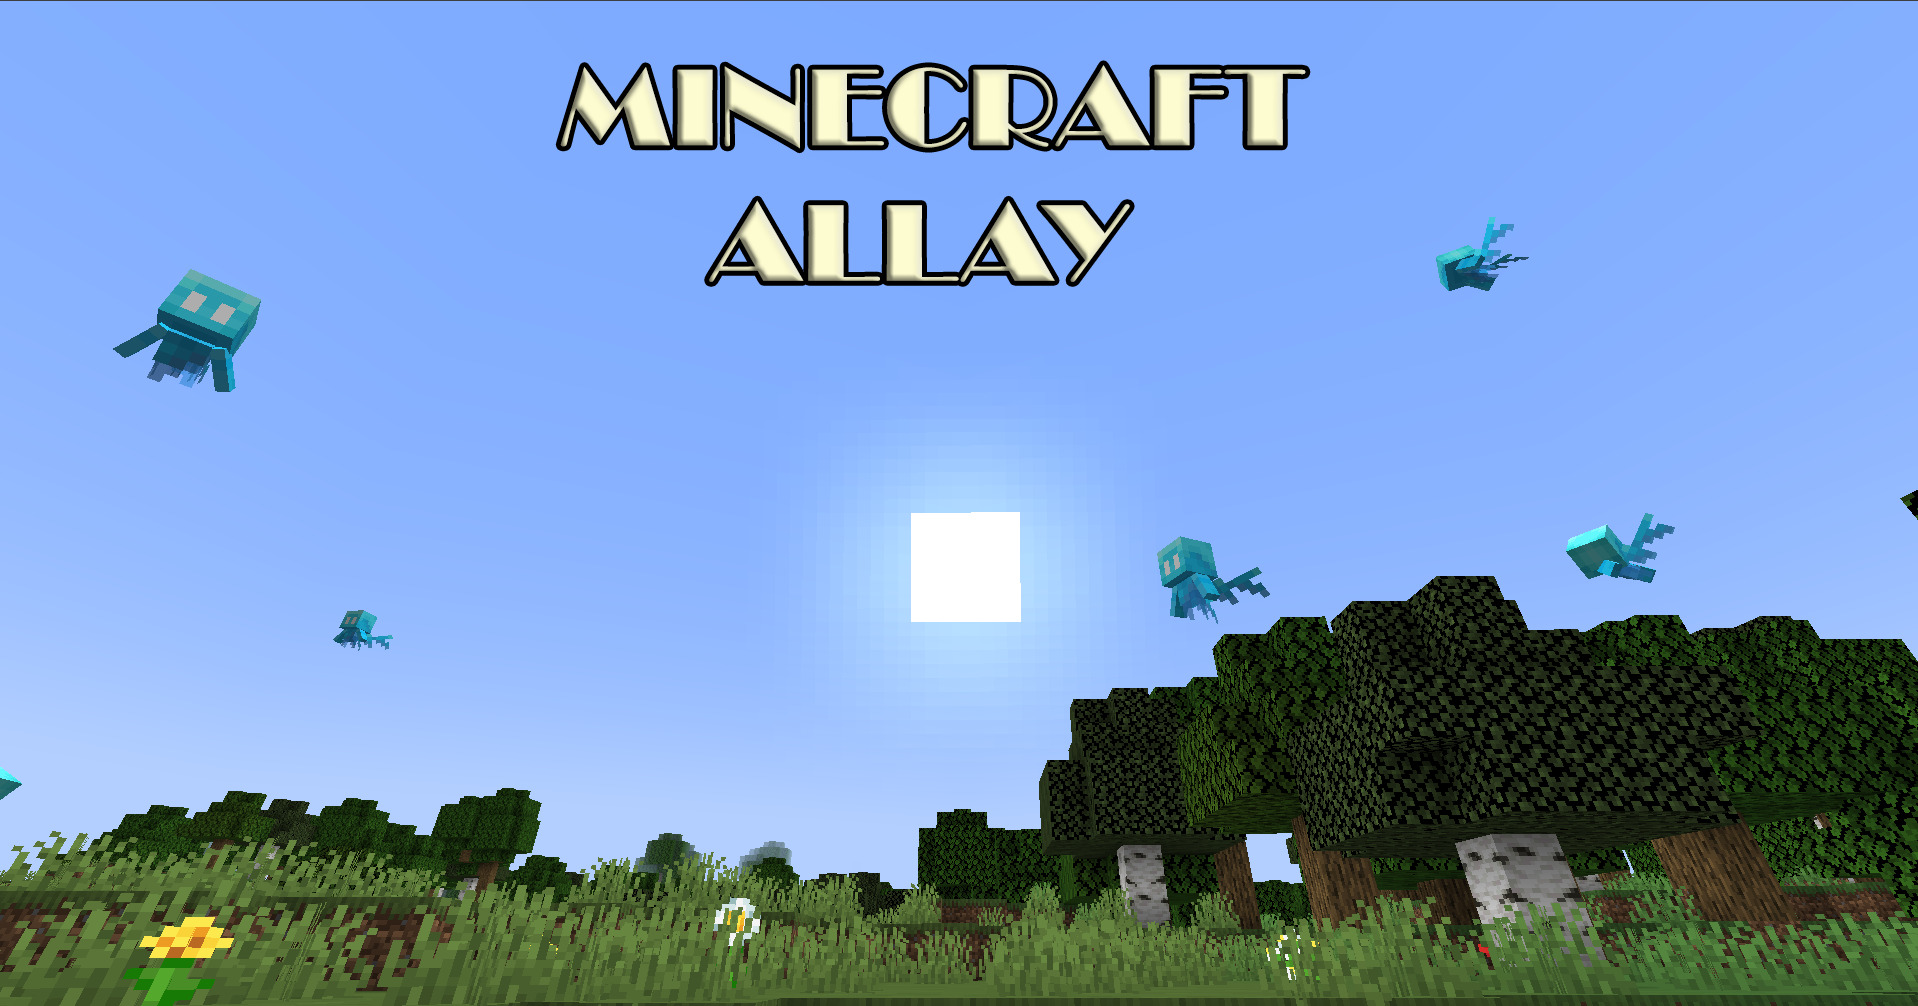 How to Find An Allay in Minecraft